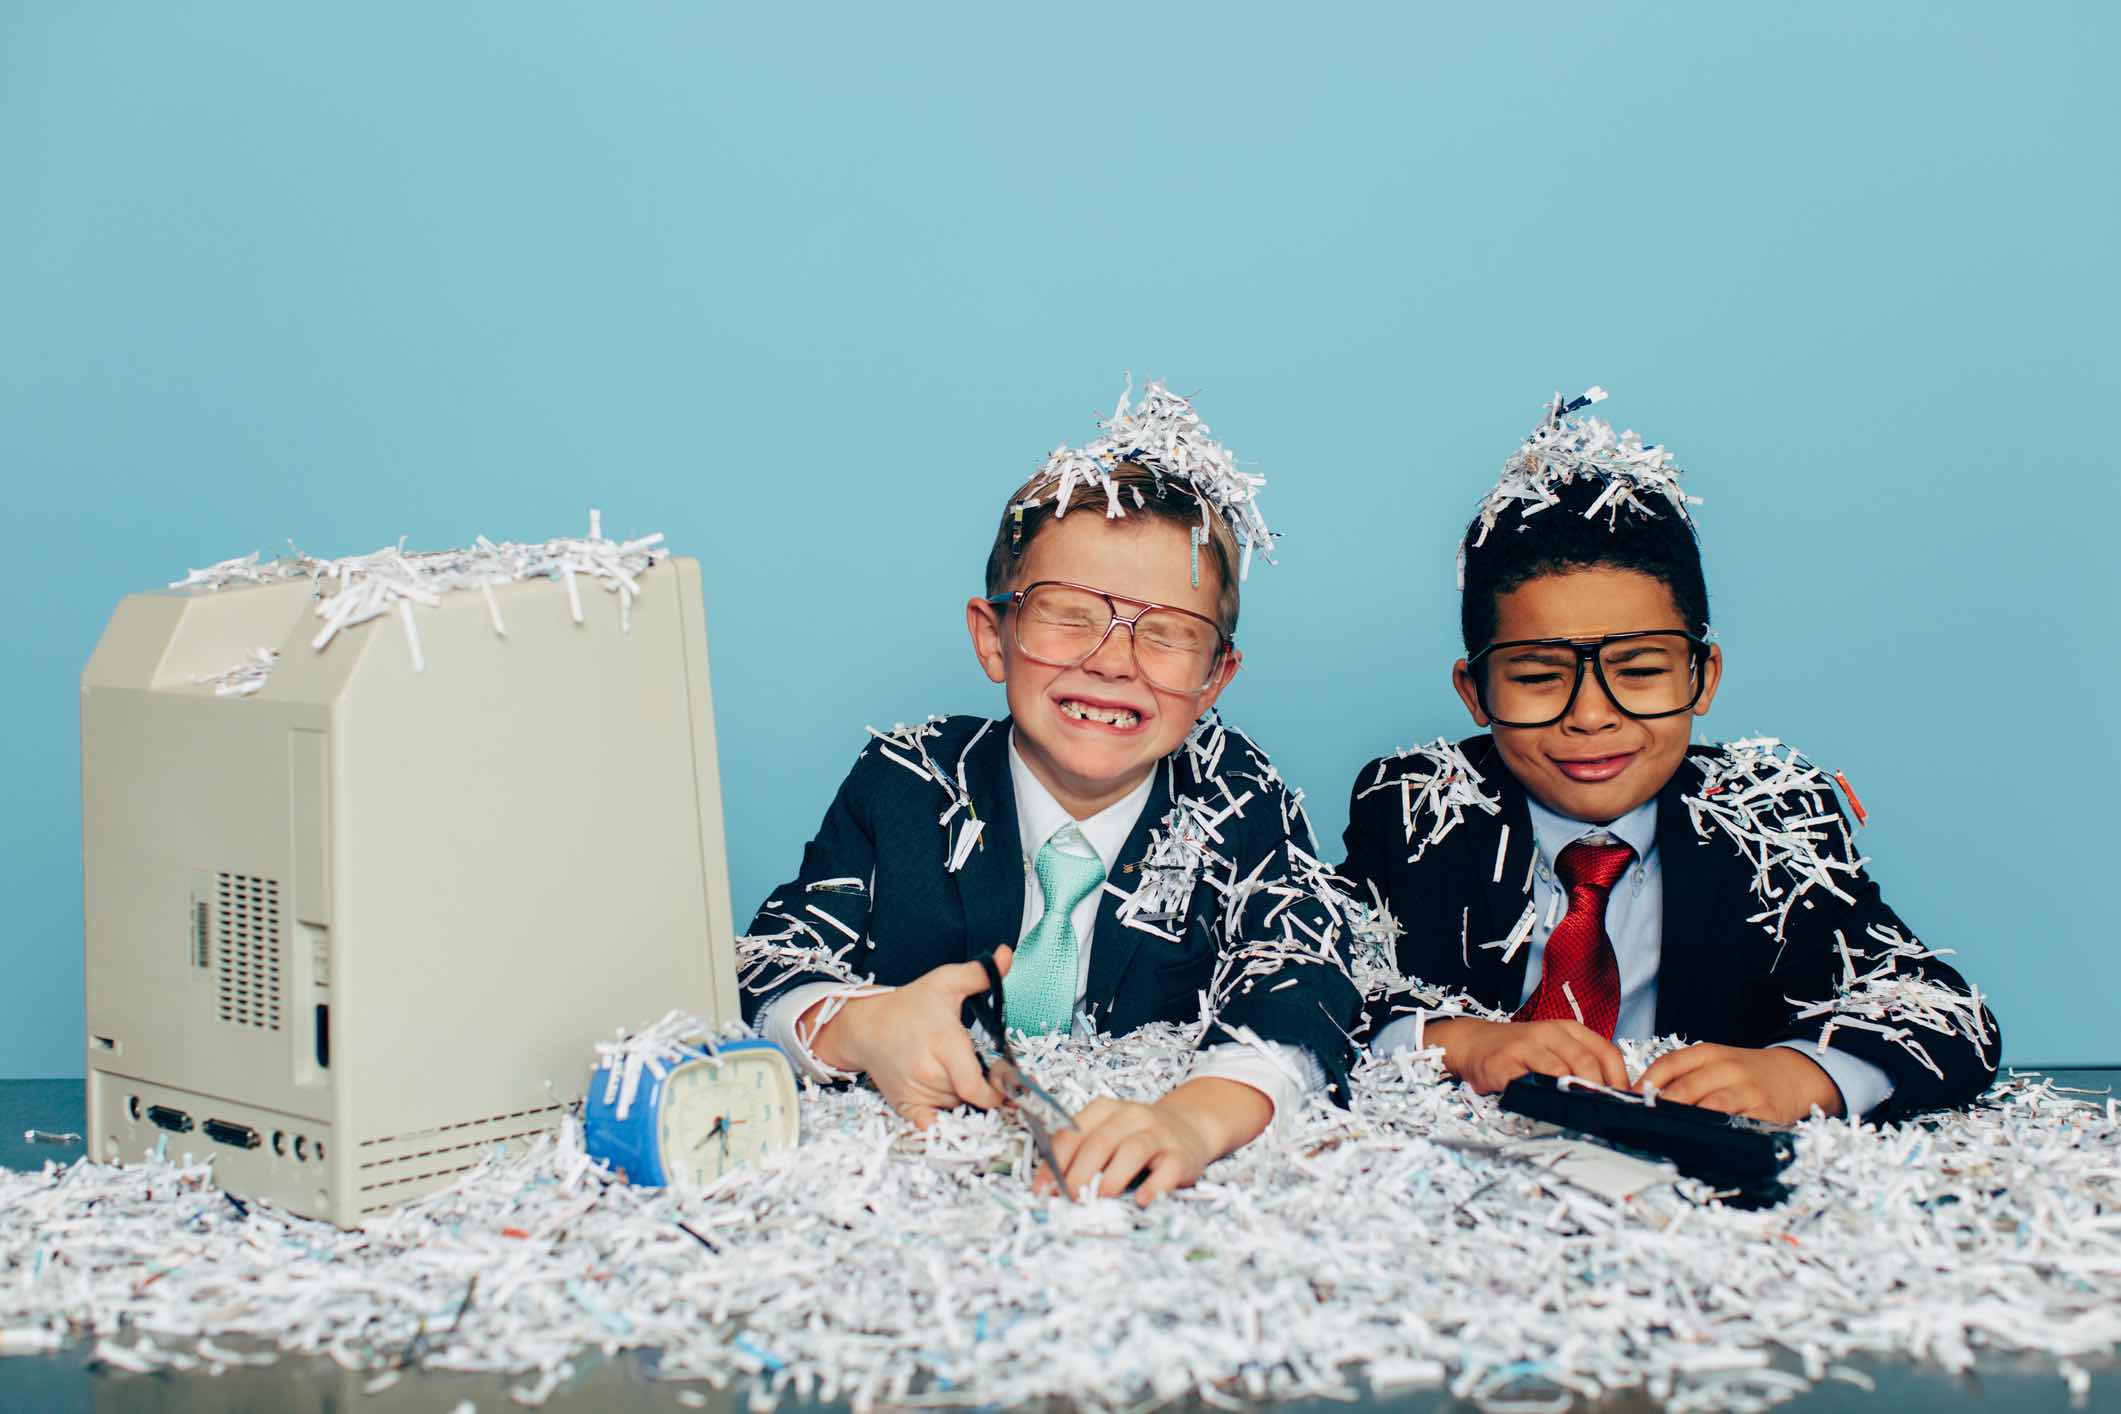 Two young boys and businessman in business attire and glasses sit at an office desk with lots of shredded paper all over them. The business they operate has just been compromised and they are victims of identity theft. They are crying and don't know what to do. Retro style.